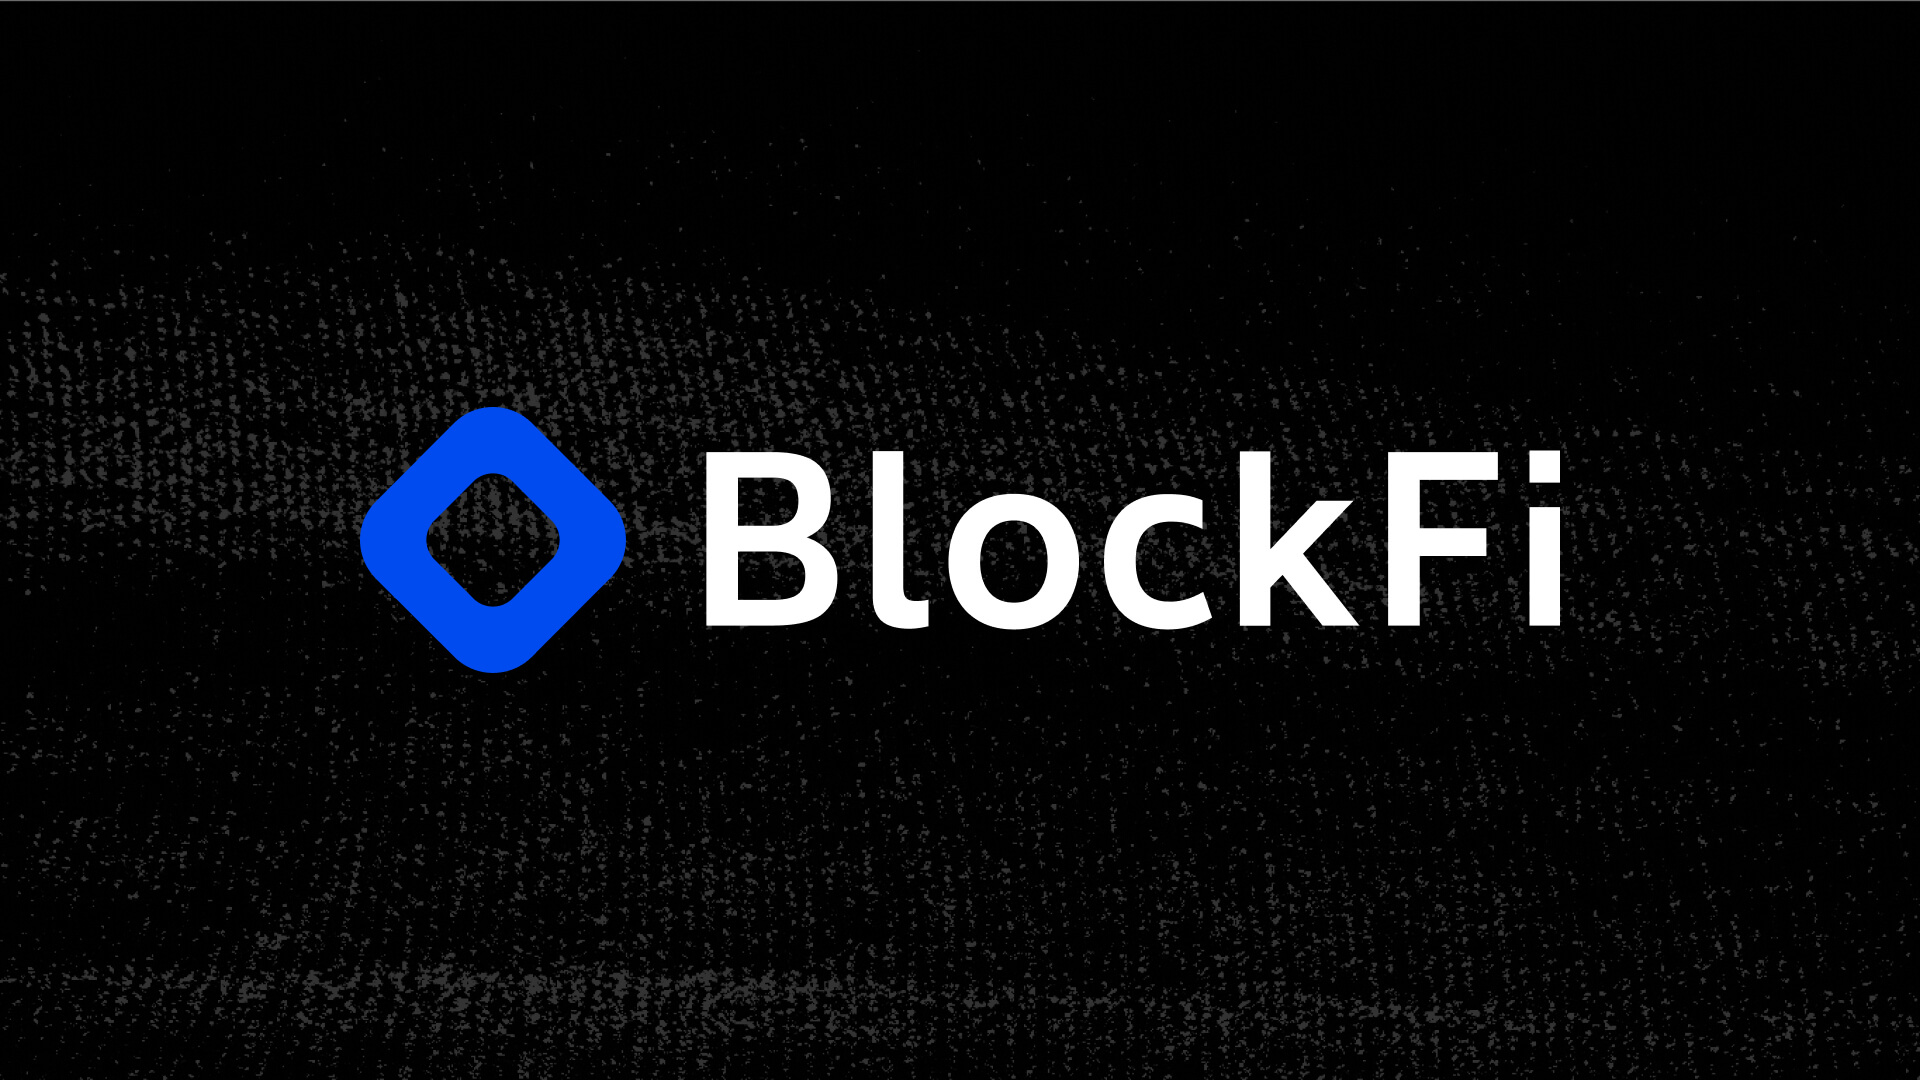 BlockFi Requests Permission to Convert Assets into Stablecoins